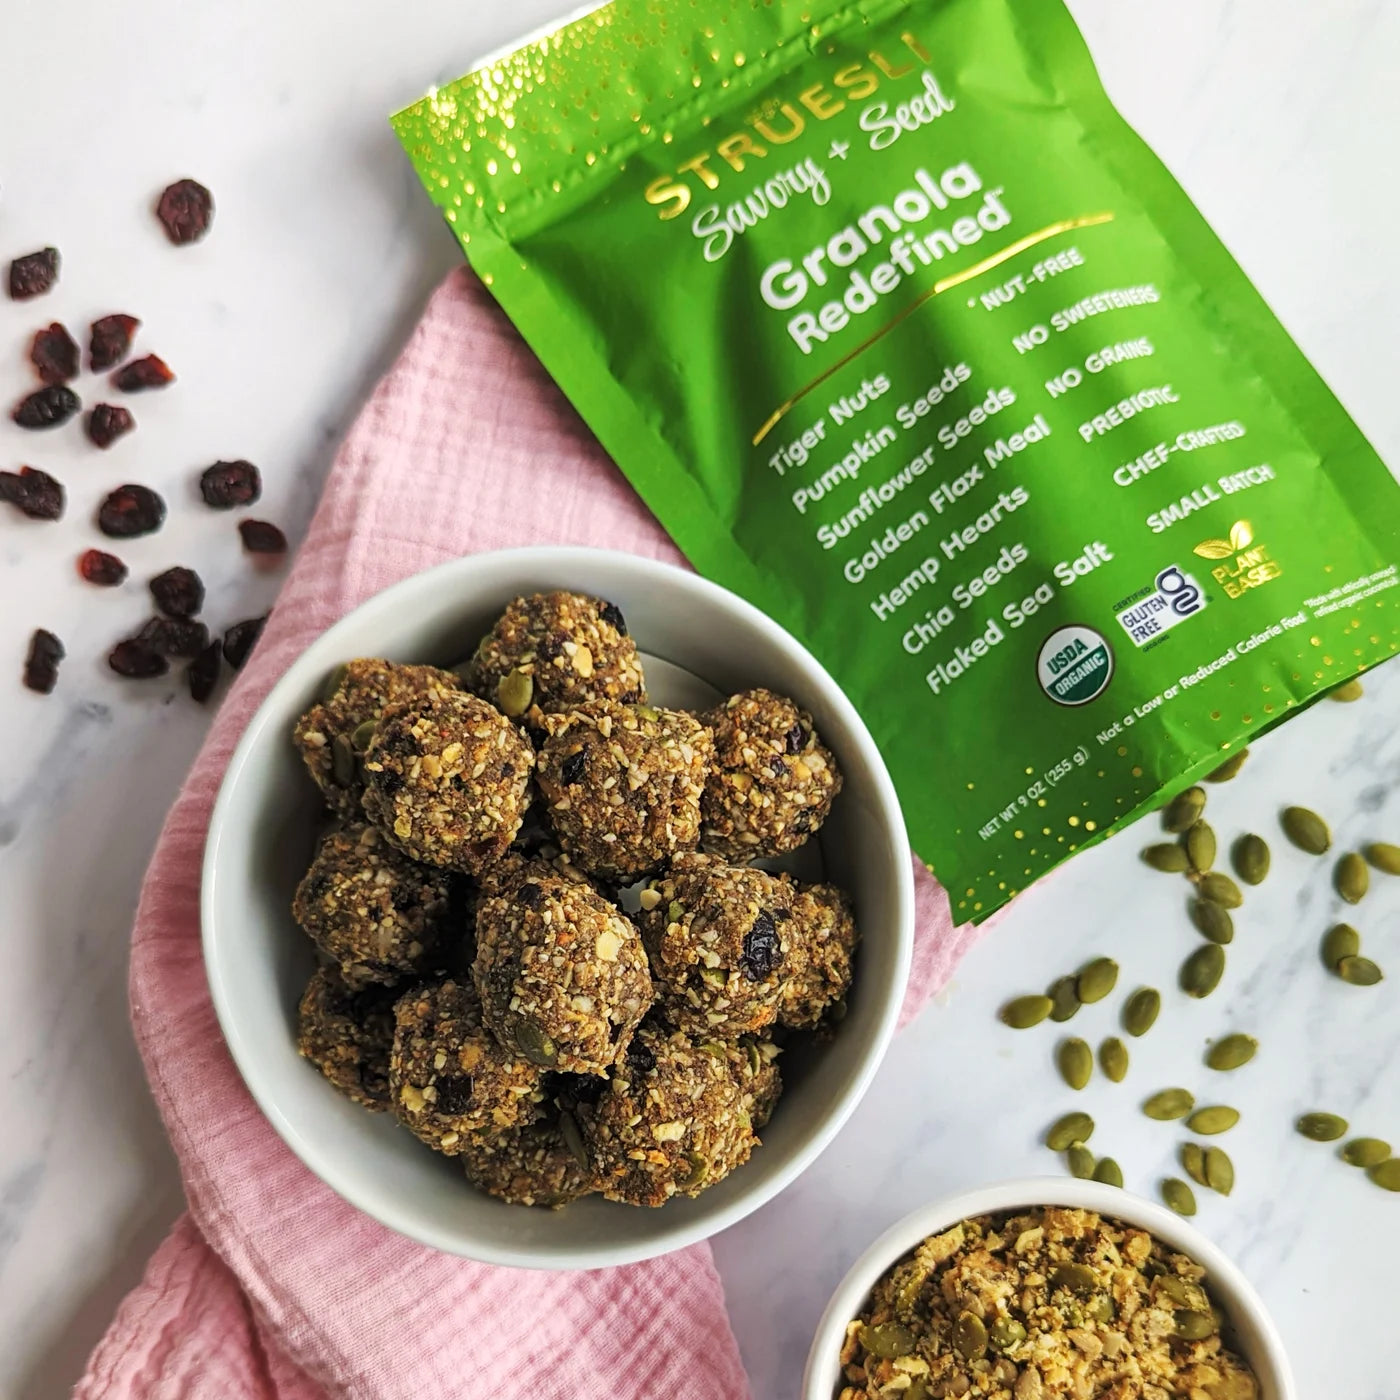 Nut-free bliss bites stacked in a bowl next to a bag of Struesli savory + seed granola.